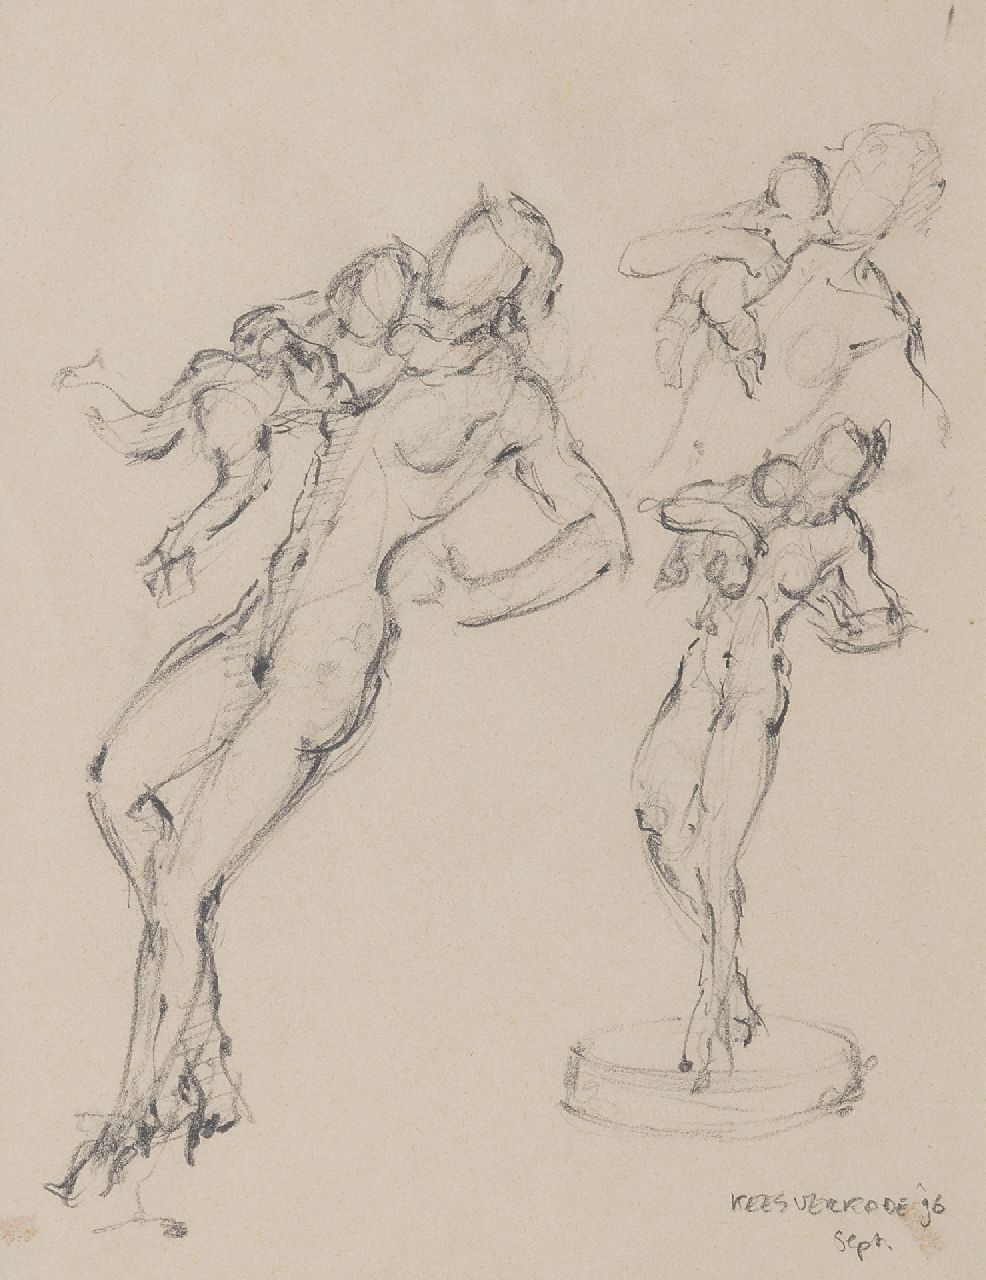 Verkade K.  | Korstiaan 'Kees' Verkade | Watercolours and drawings offered for sale | Study for sculpture 'l'Elan', pencil on paper 31.0 x 24.8 cm, signed l.r. and dated sept. '96